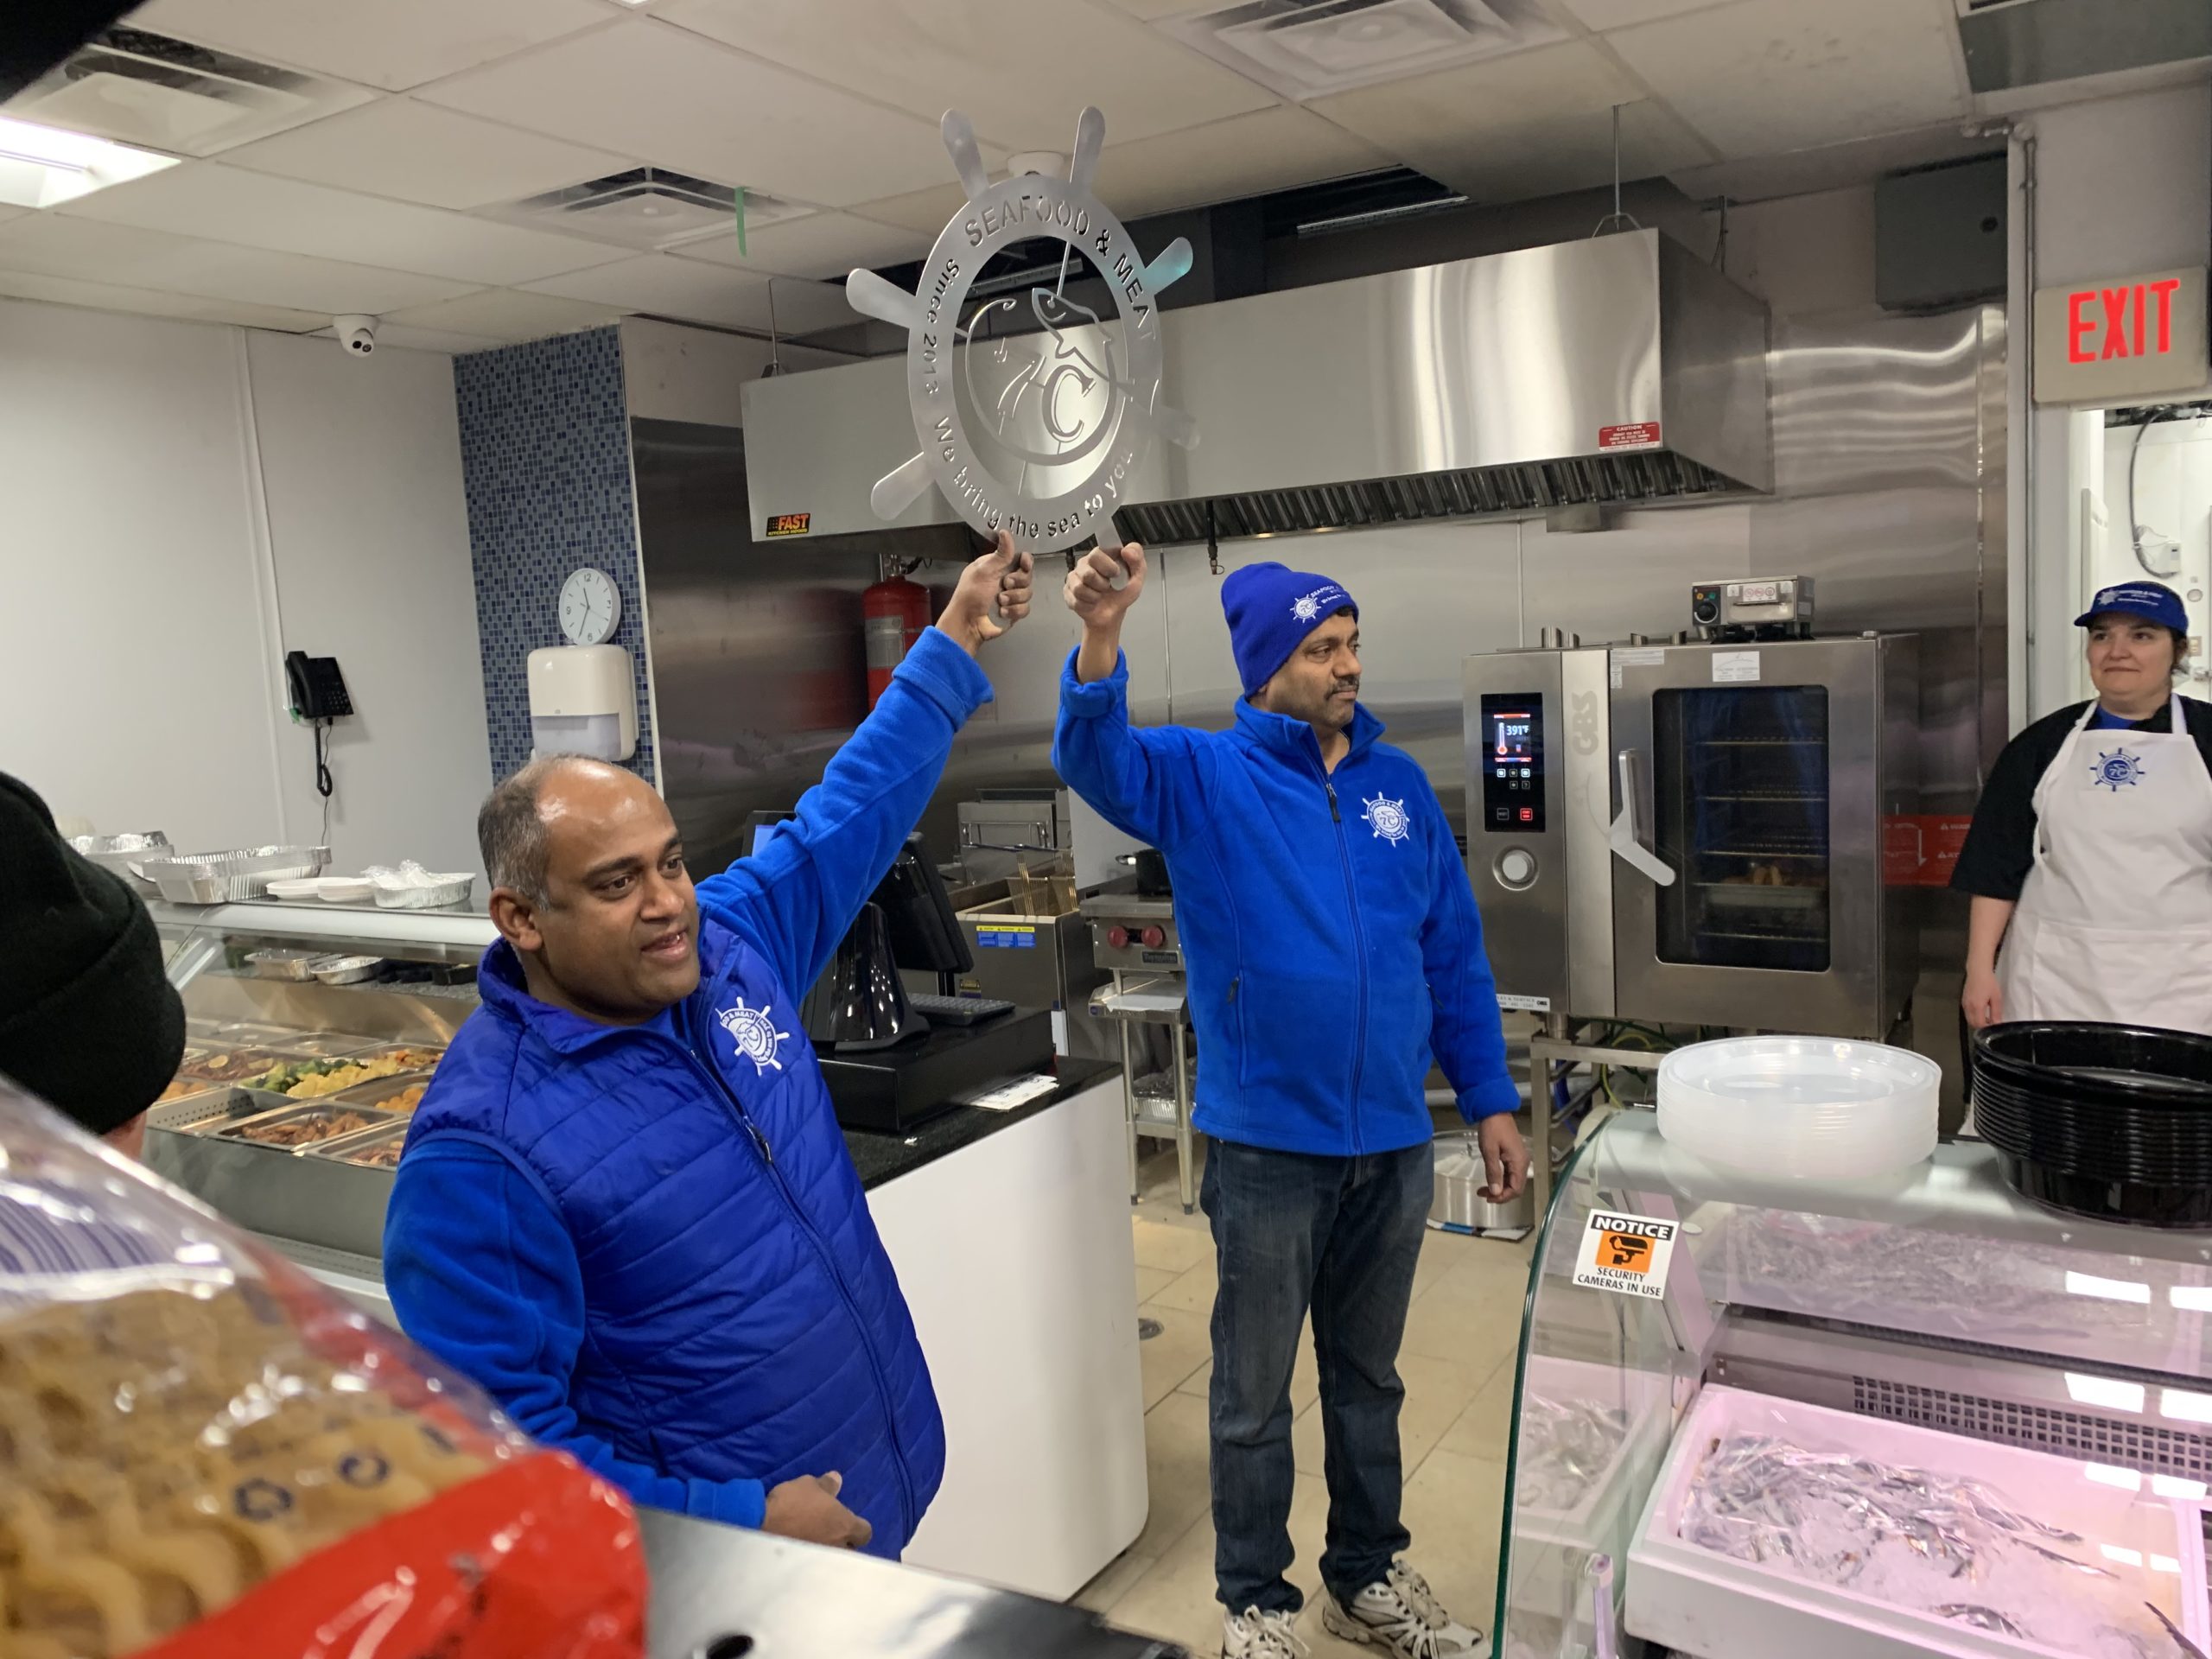 Raj and Giovanni - owners of 7C Seafood & Meats